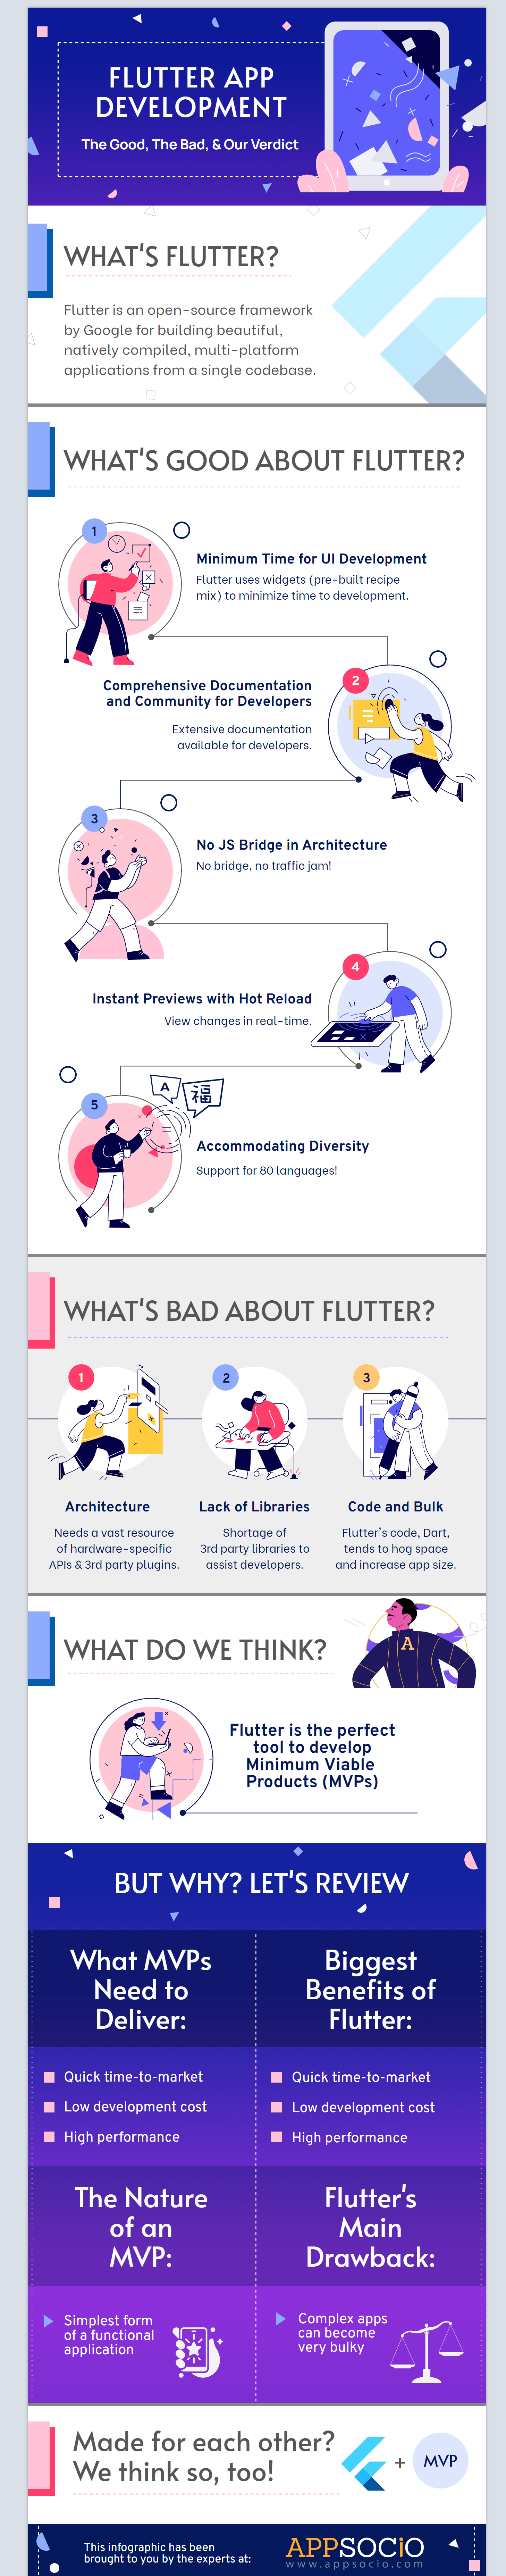 [Infographic] Flutter App Development Pros and Cons for Android and iOS